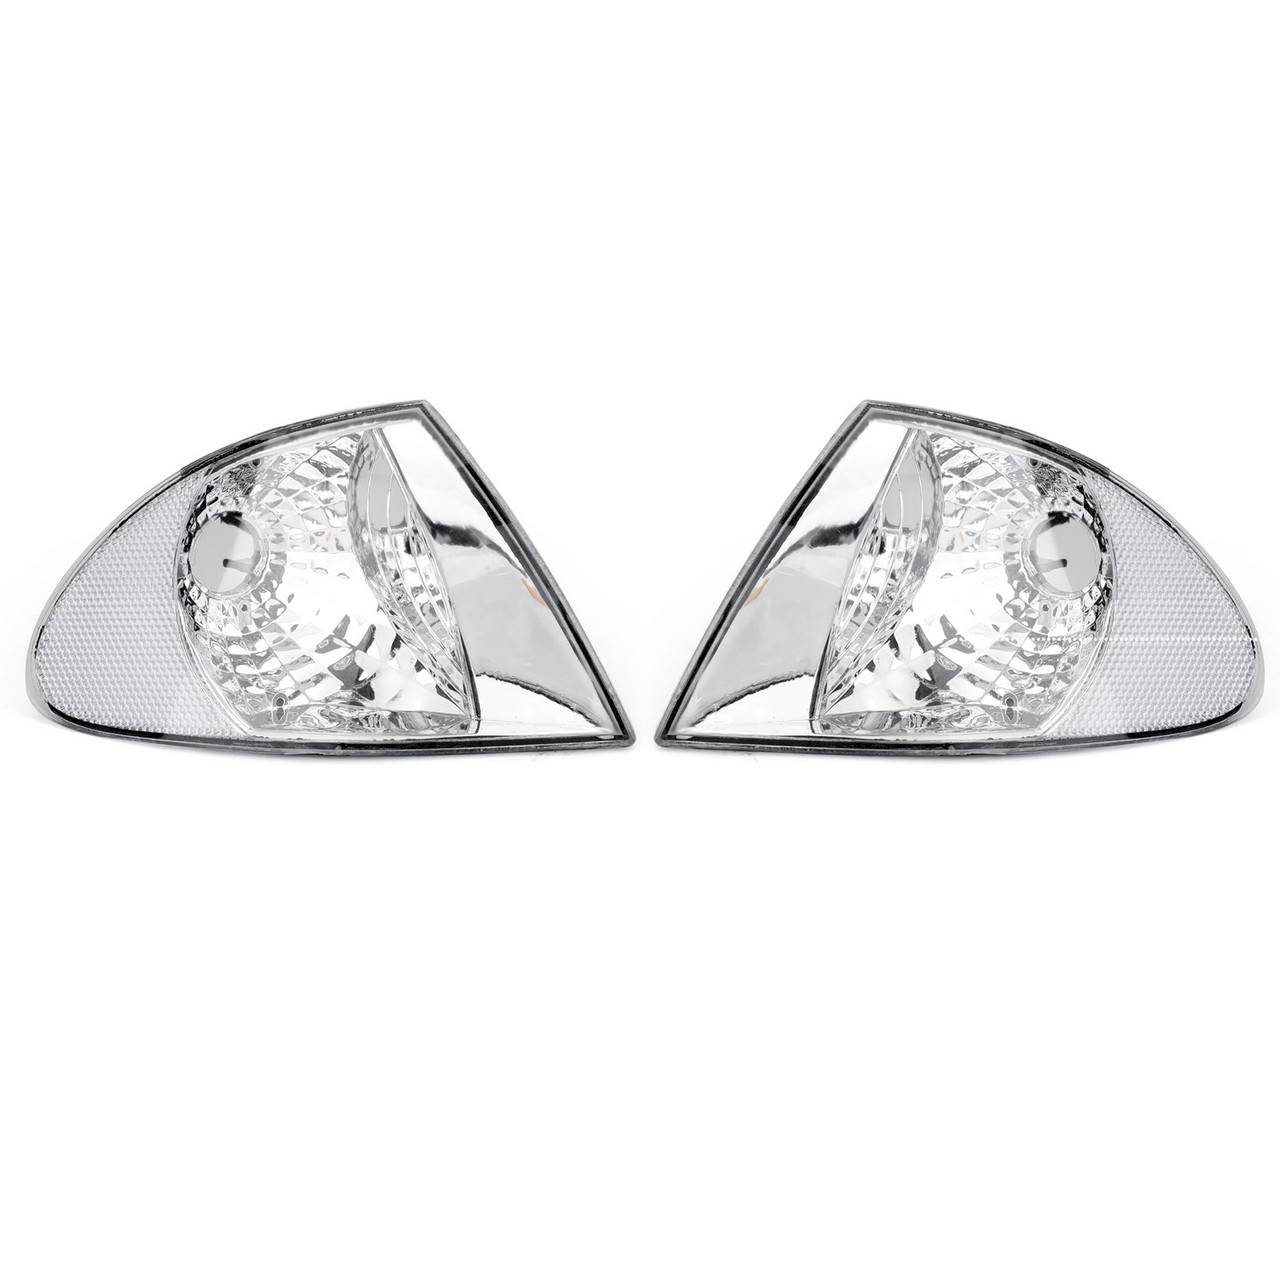 Pair Front Indicator Turn Signal Corner Lights Fit For BMW 3 Series Sedan E46 98-01 Clear